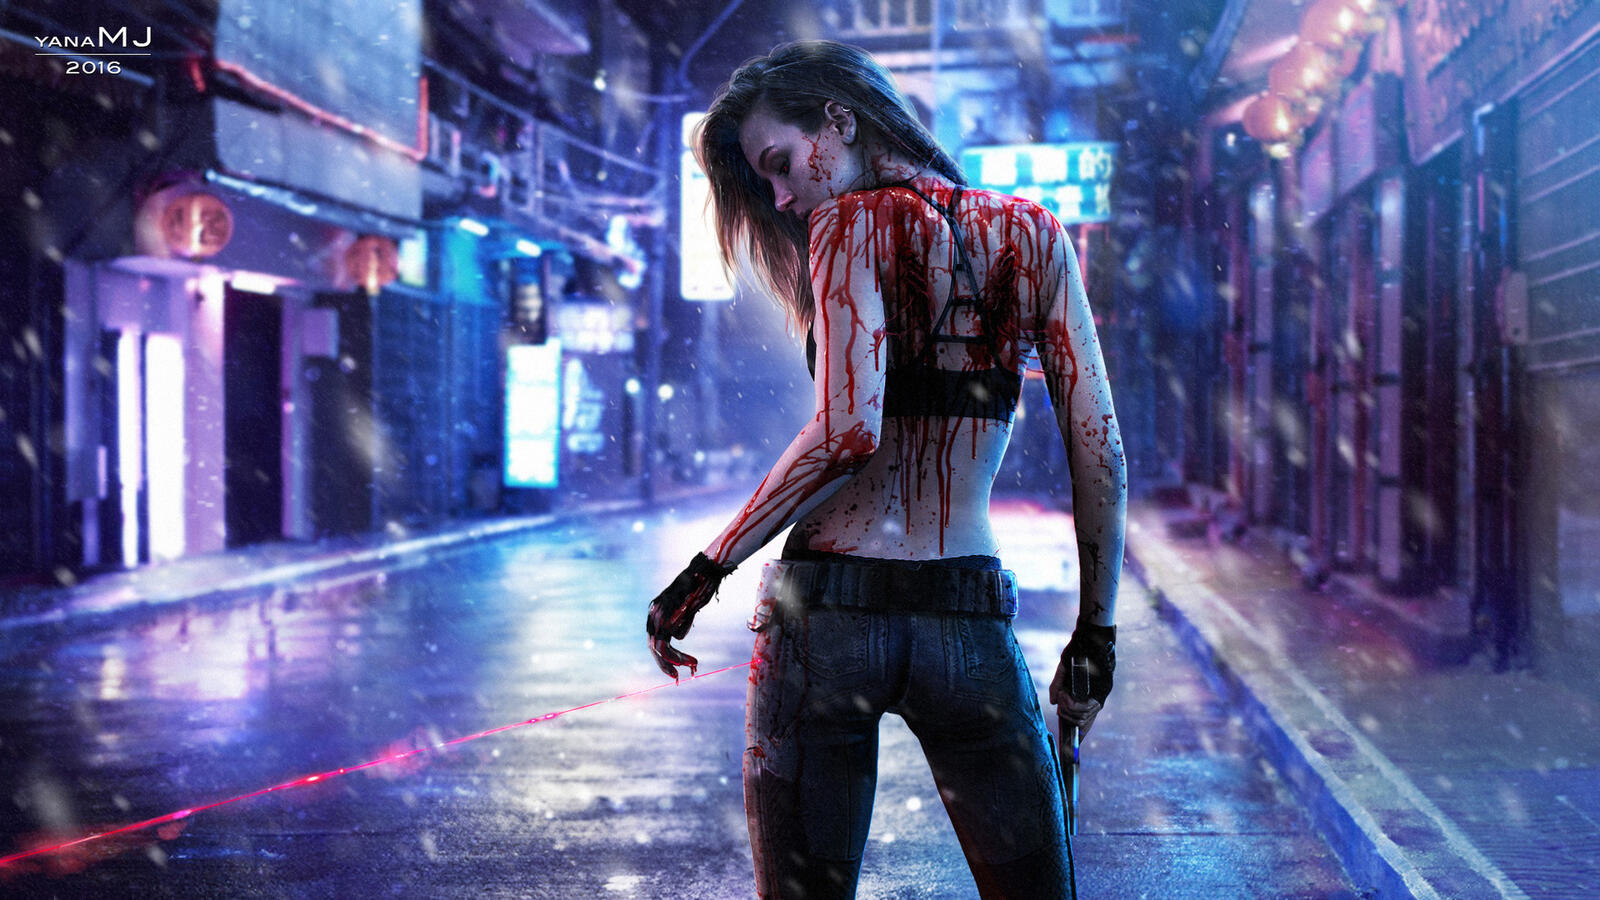 Free photo The girl in blood from the cyberpunk game 2077